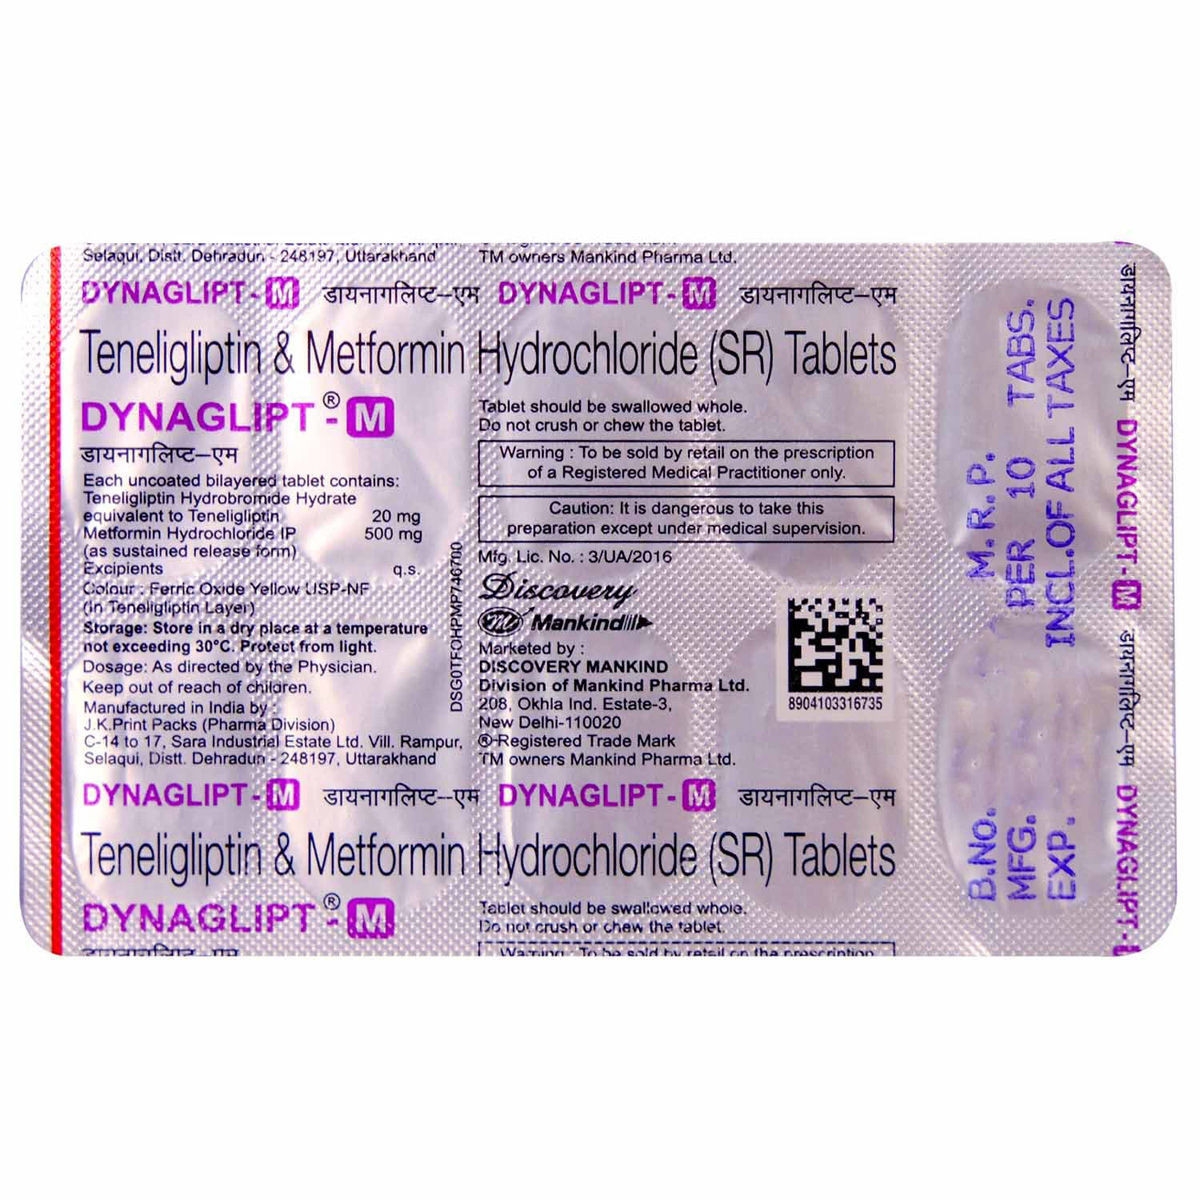 Dynaglipt-M Tablet 10's Price, Uses, Side Effects, Composition ...